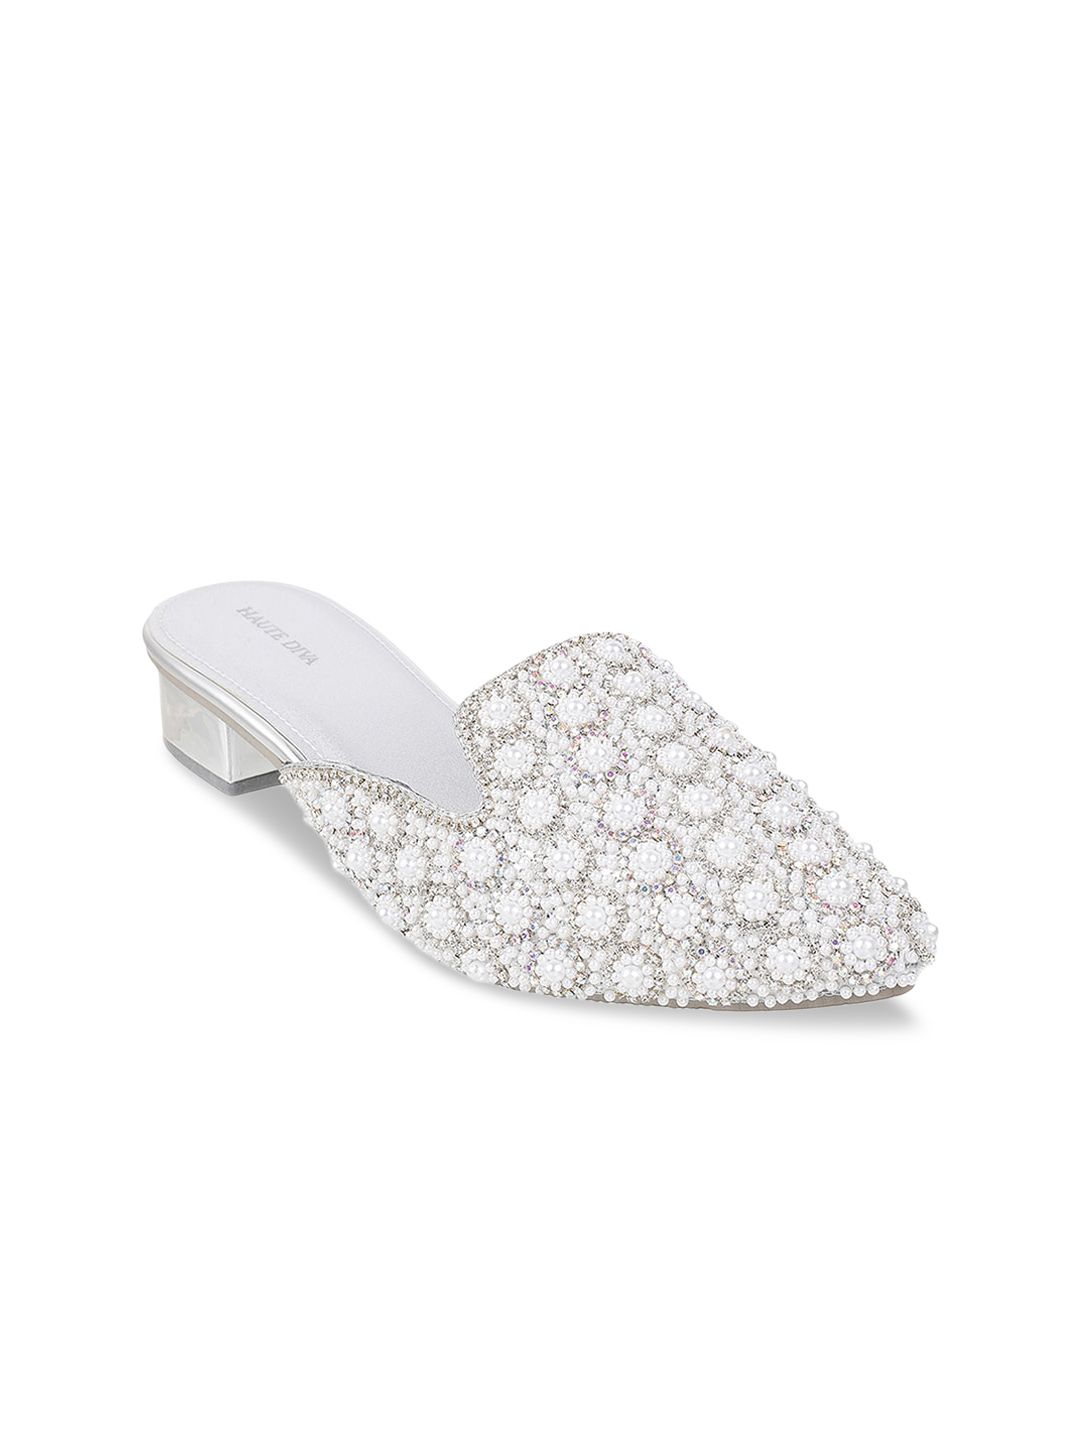 Mochi Women Silver-Toned Mules Flats Price in India